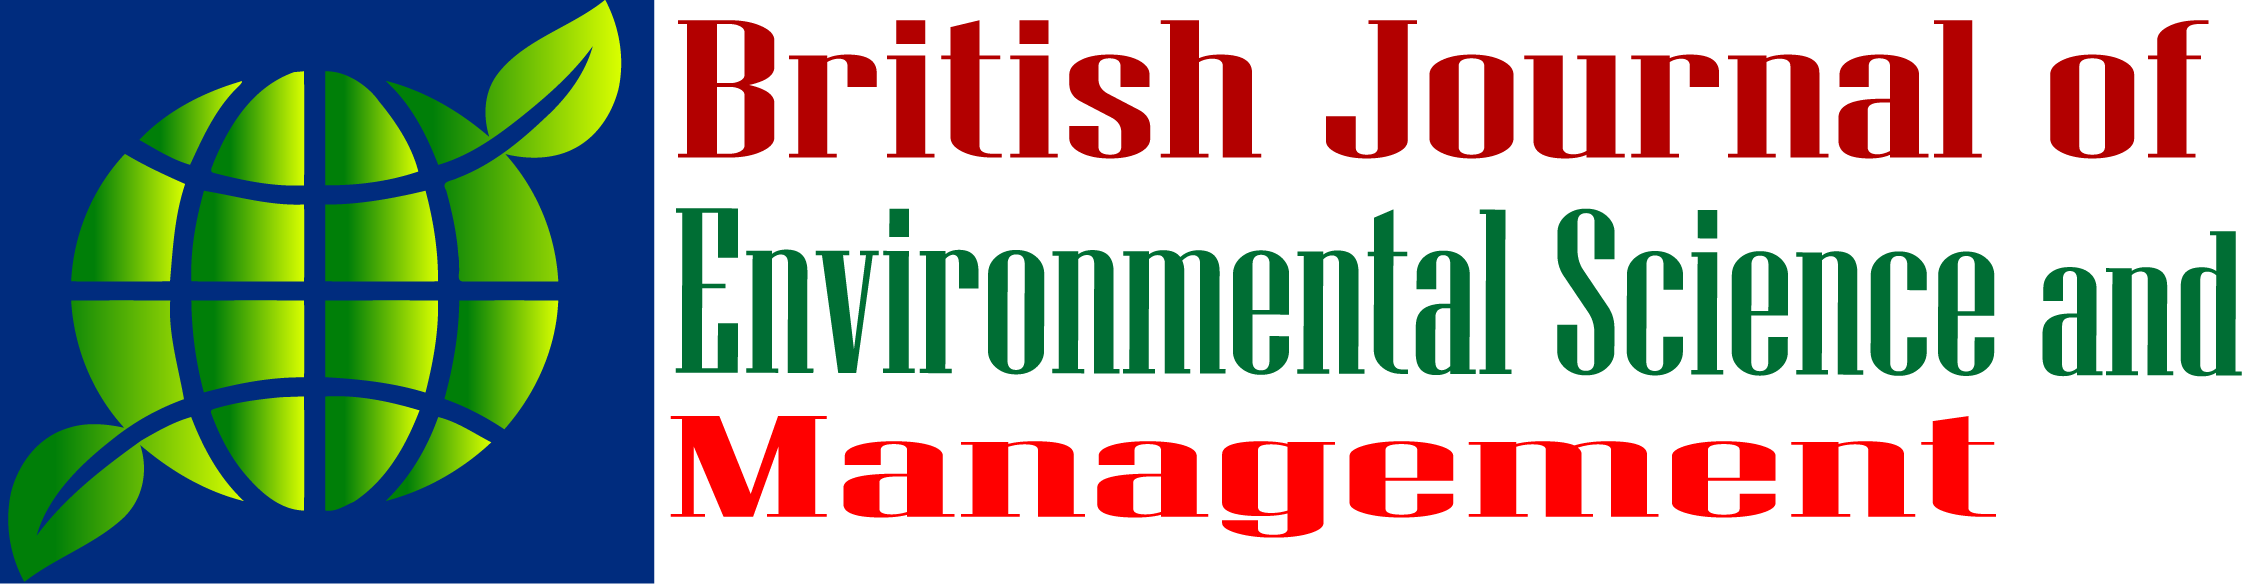 British Journal of Environmental Science and Management (BJESM)